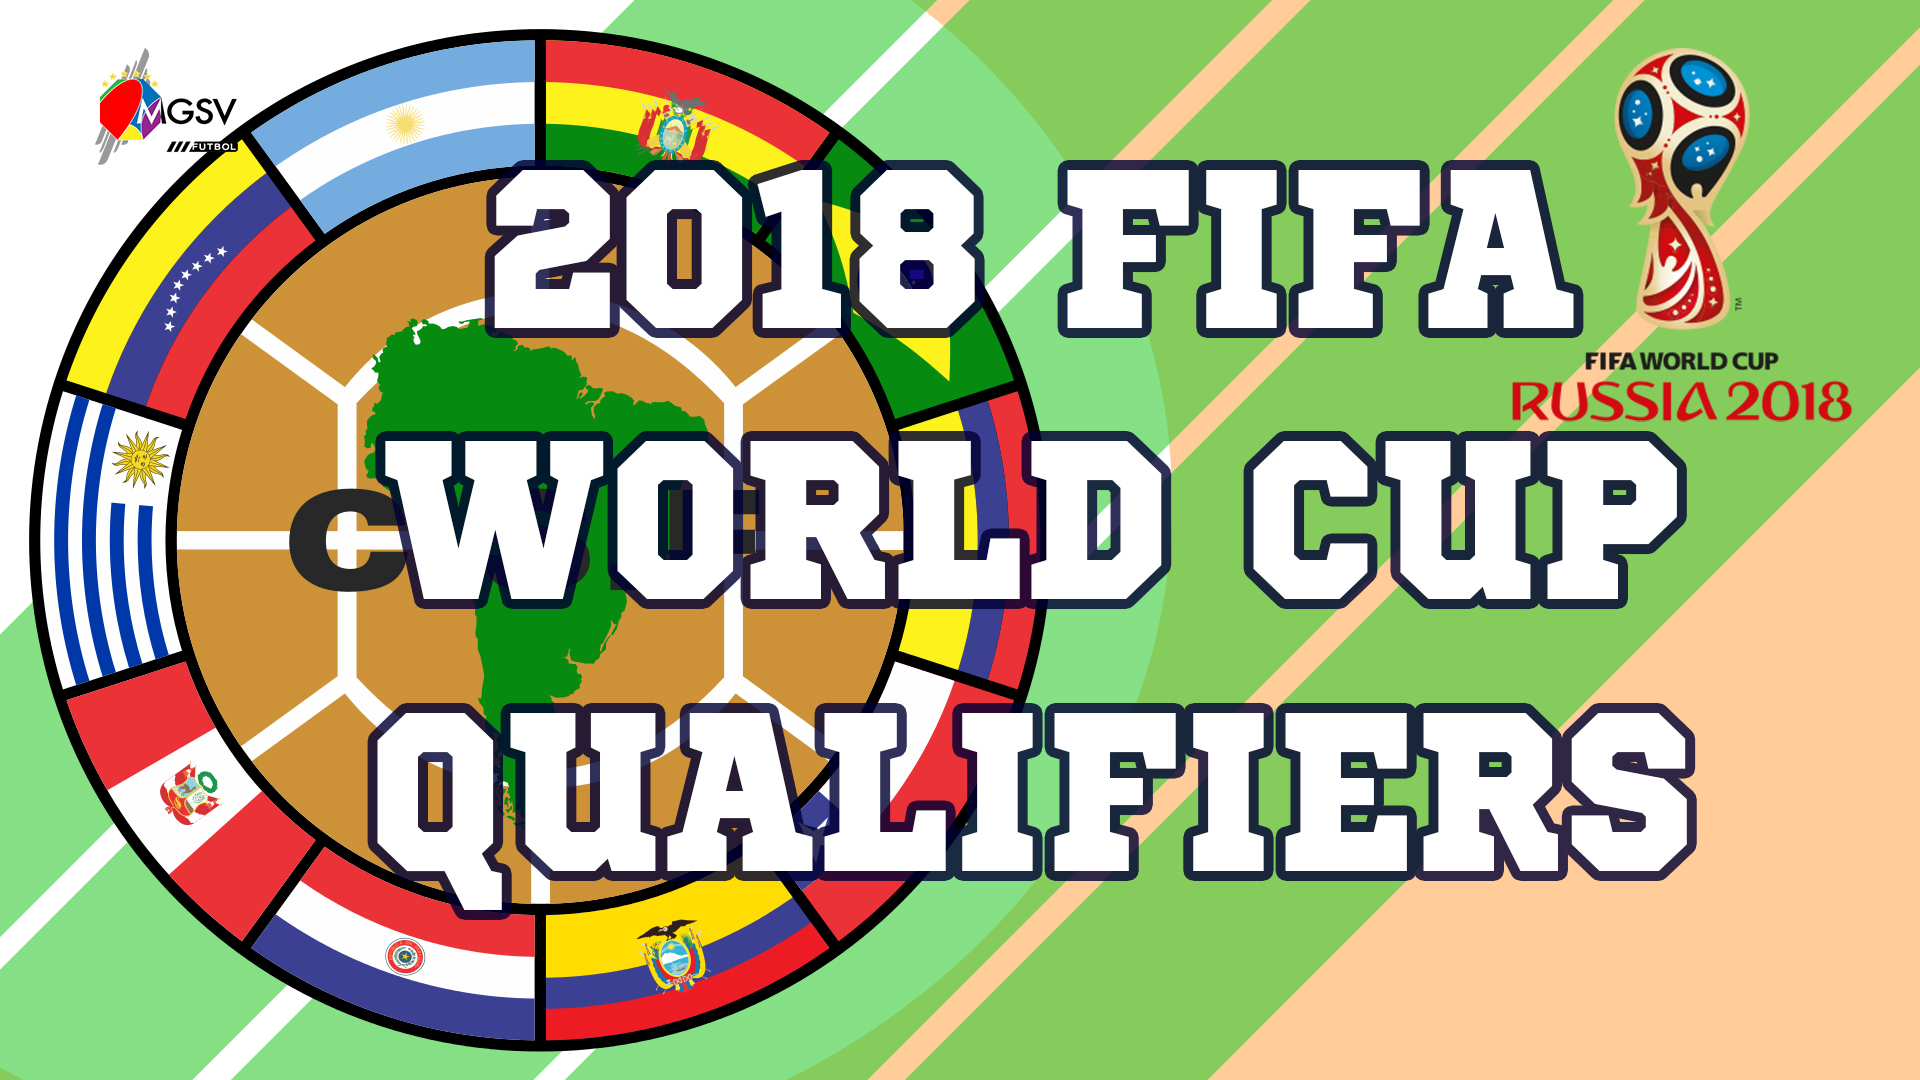 Conmebol world cup qualifiers